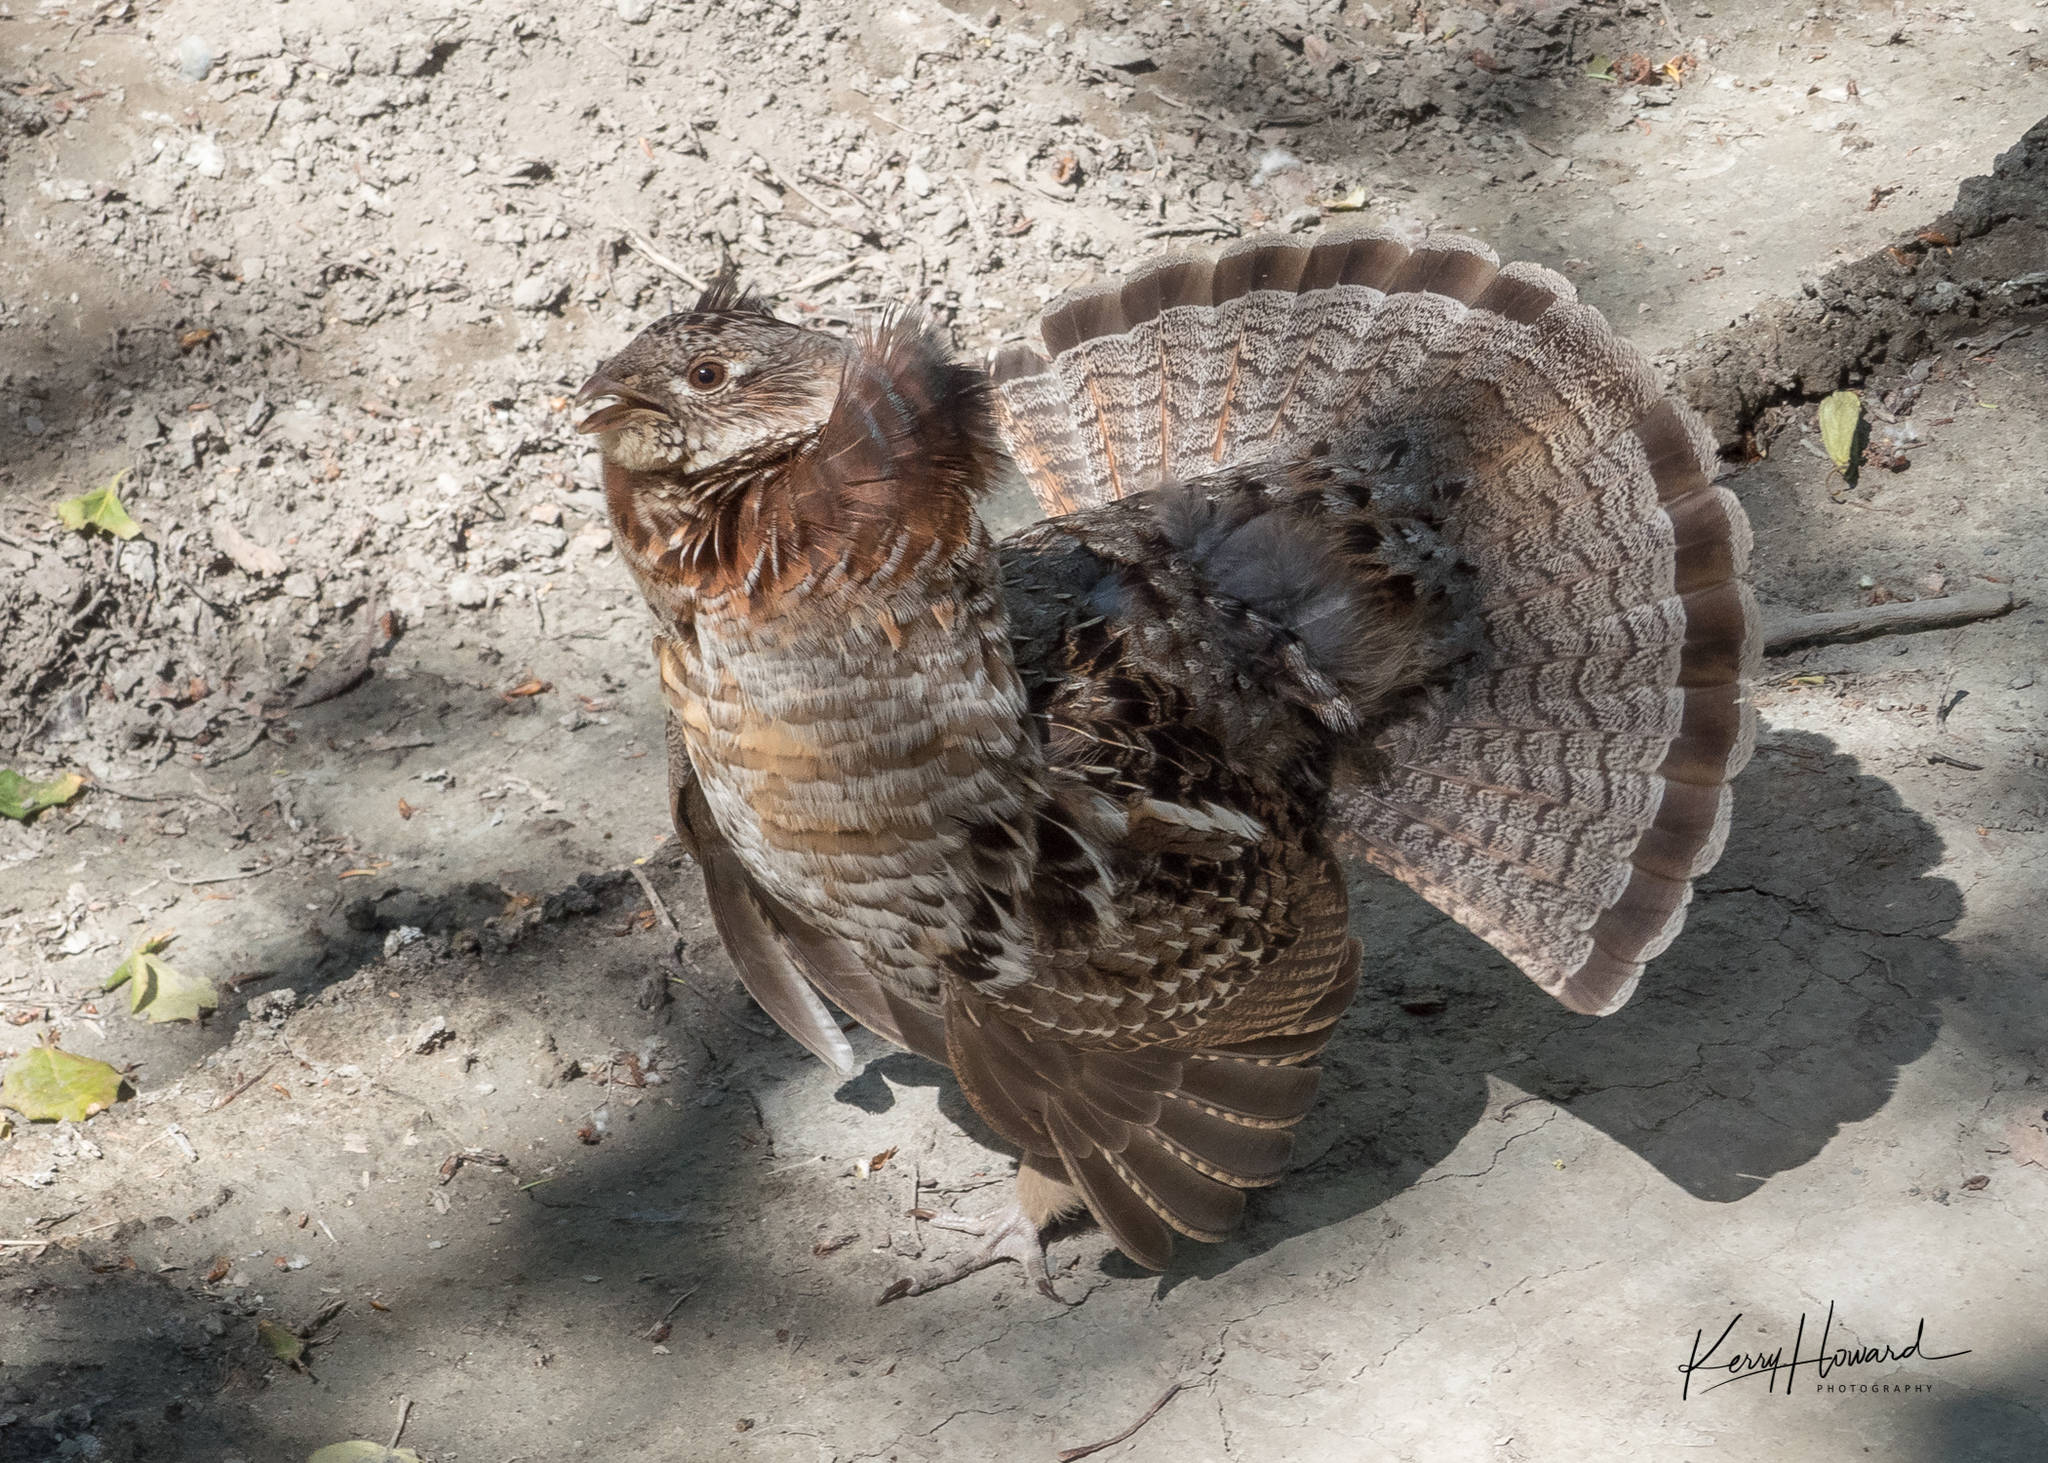 A female ruffed grouse defends her chicks with a vigorous display. (Photo by Kerry Howard)